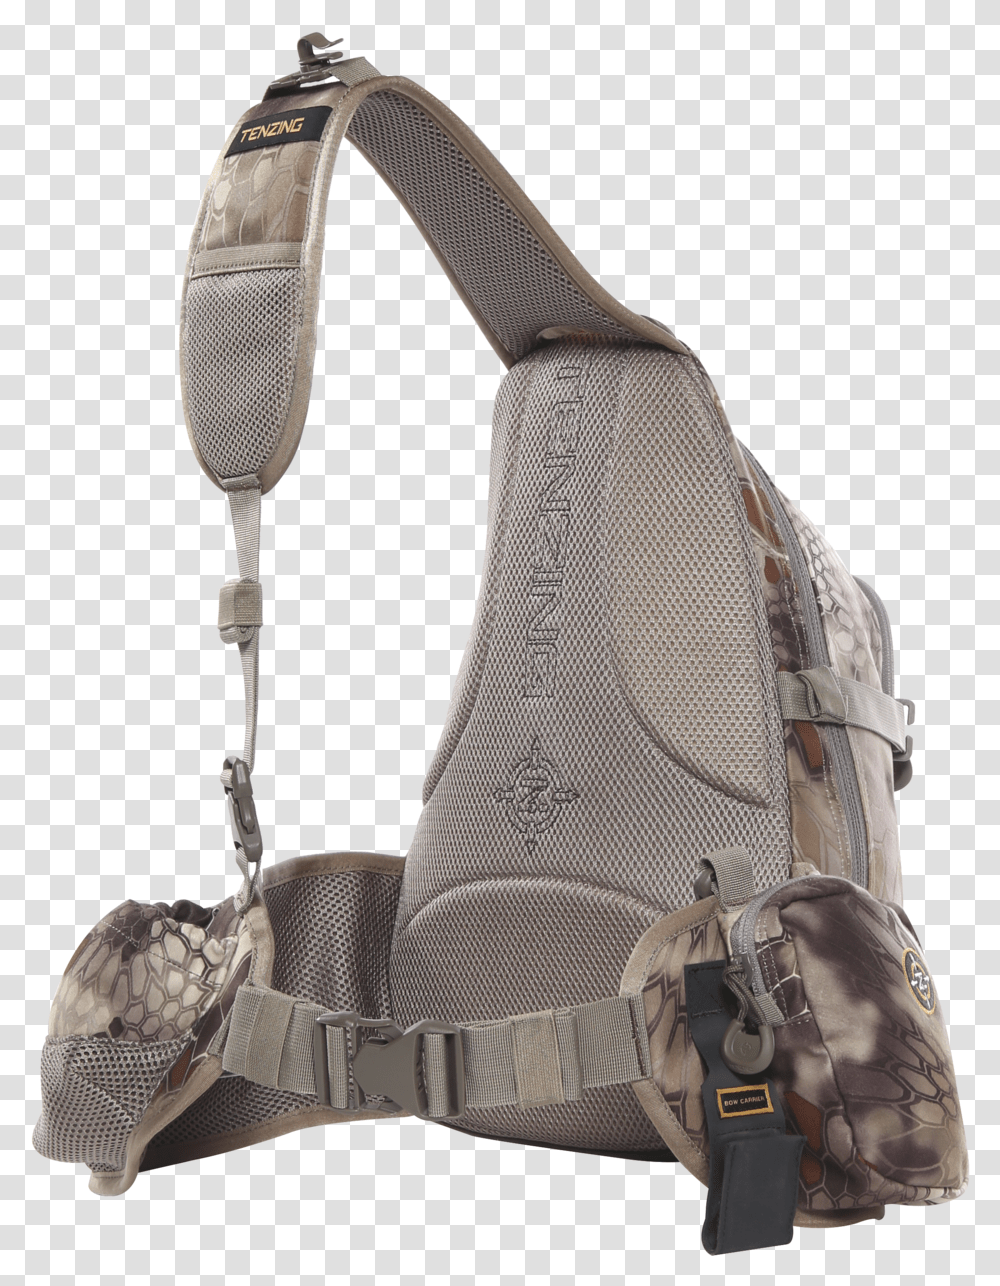 Hobo Drawing Drifter Diaper Bag, Furniture, Chair, Harness, Accessories Transparent Png